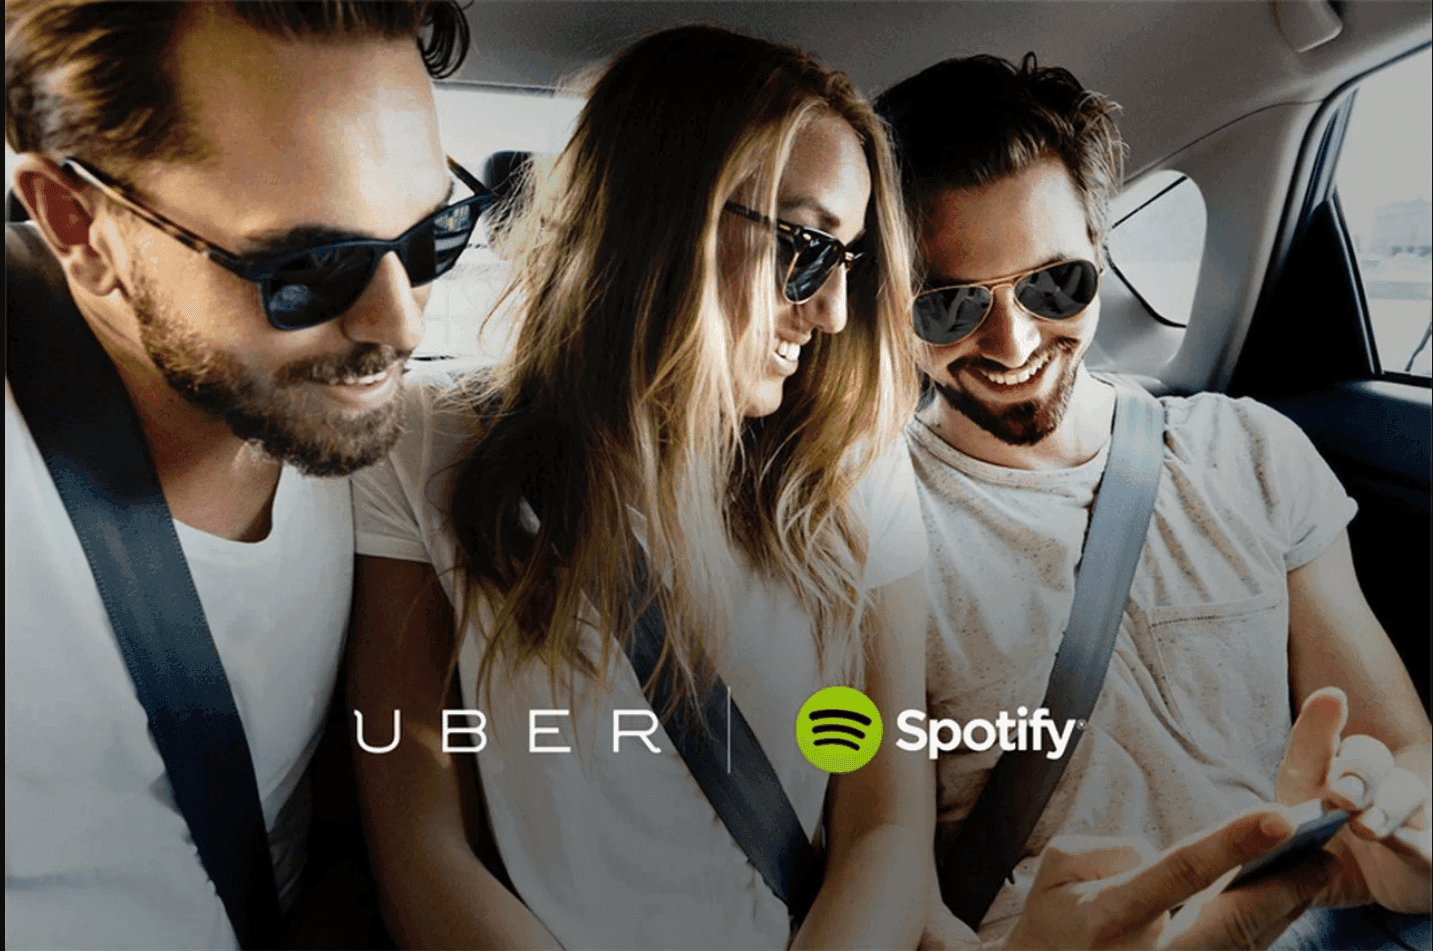 A photo of three people in a car, promoting the UBER and Spotify partnership.